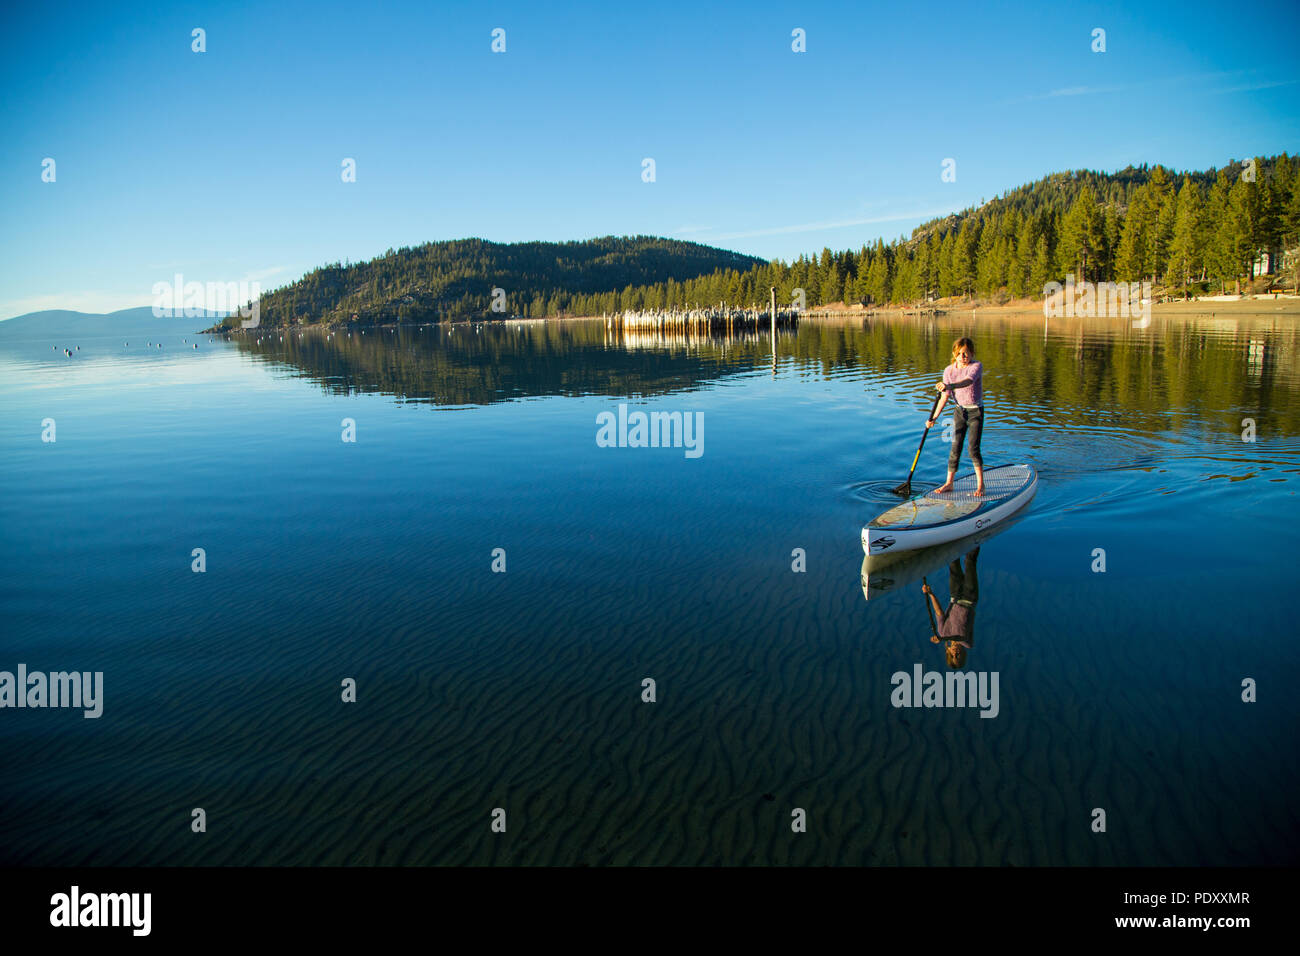 Young Girl on Paddle Board, Lake Tahoe, Nevada, USA Banque D'Images